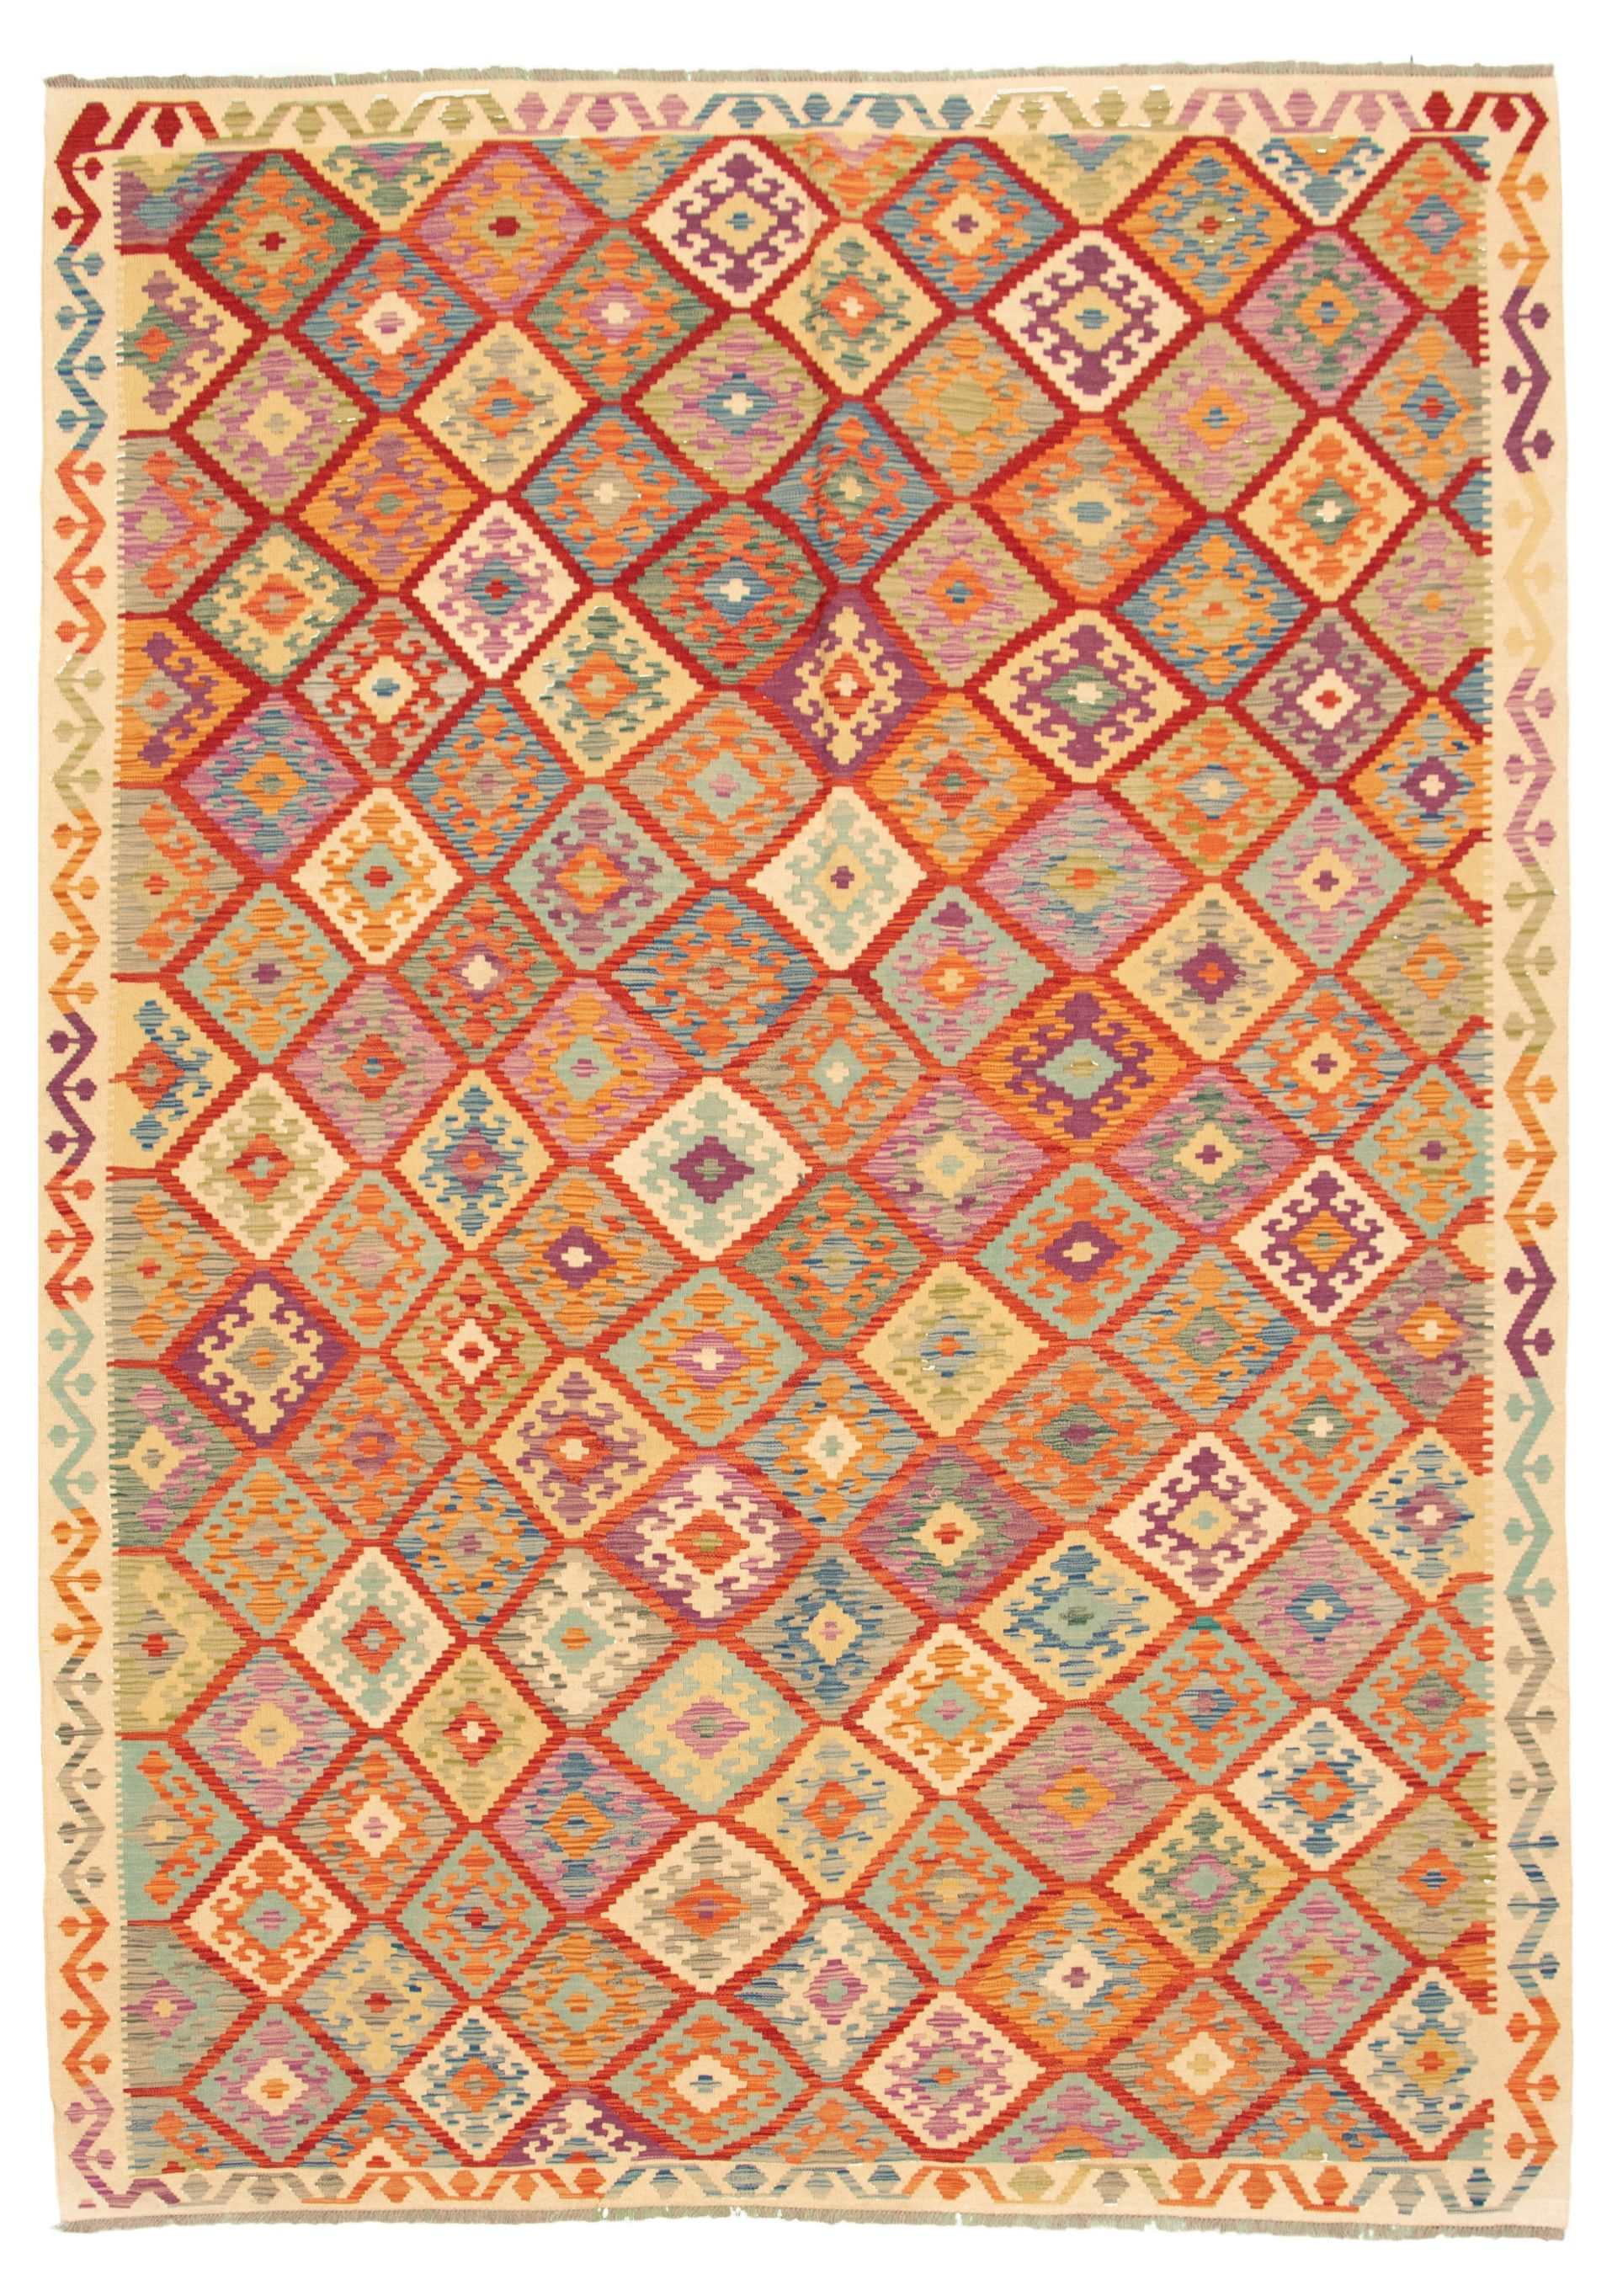 Hand woven Bold and Colorful  Ivory, Red Wool Kilim 8'6" x 11'7" Size: 8'6" x 11'7"  